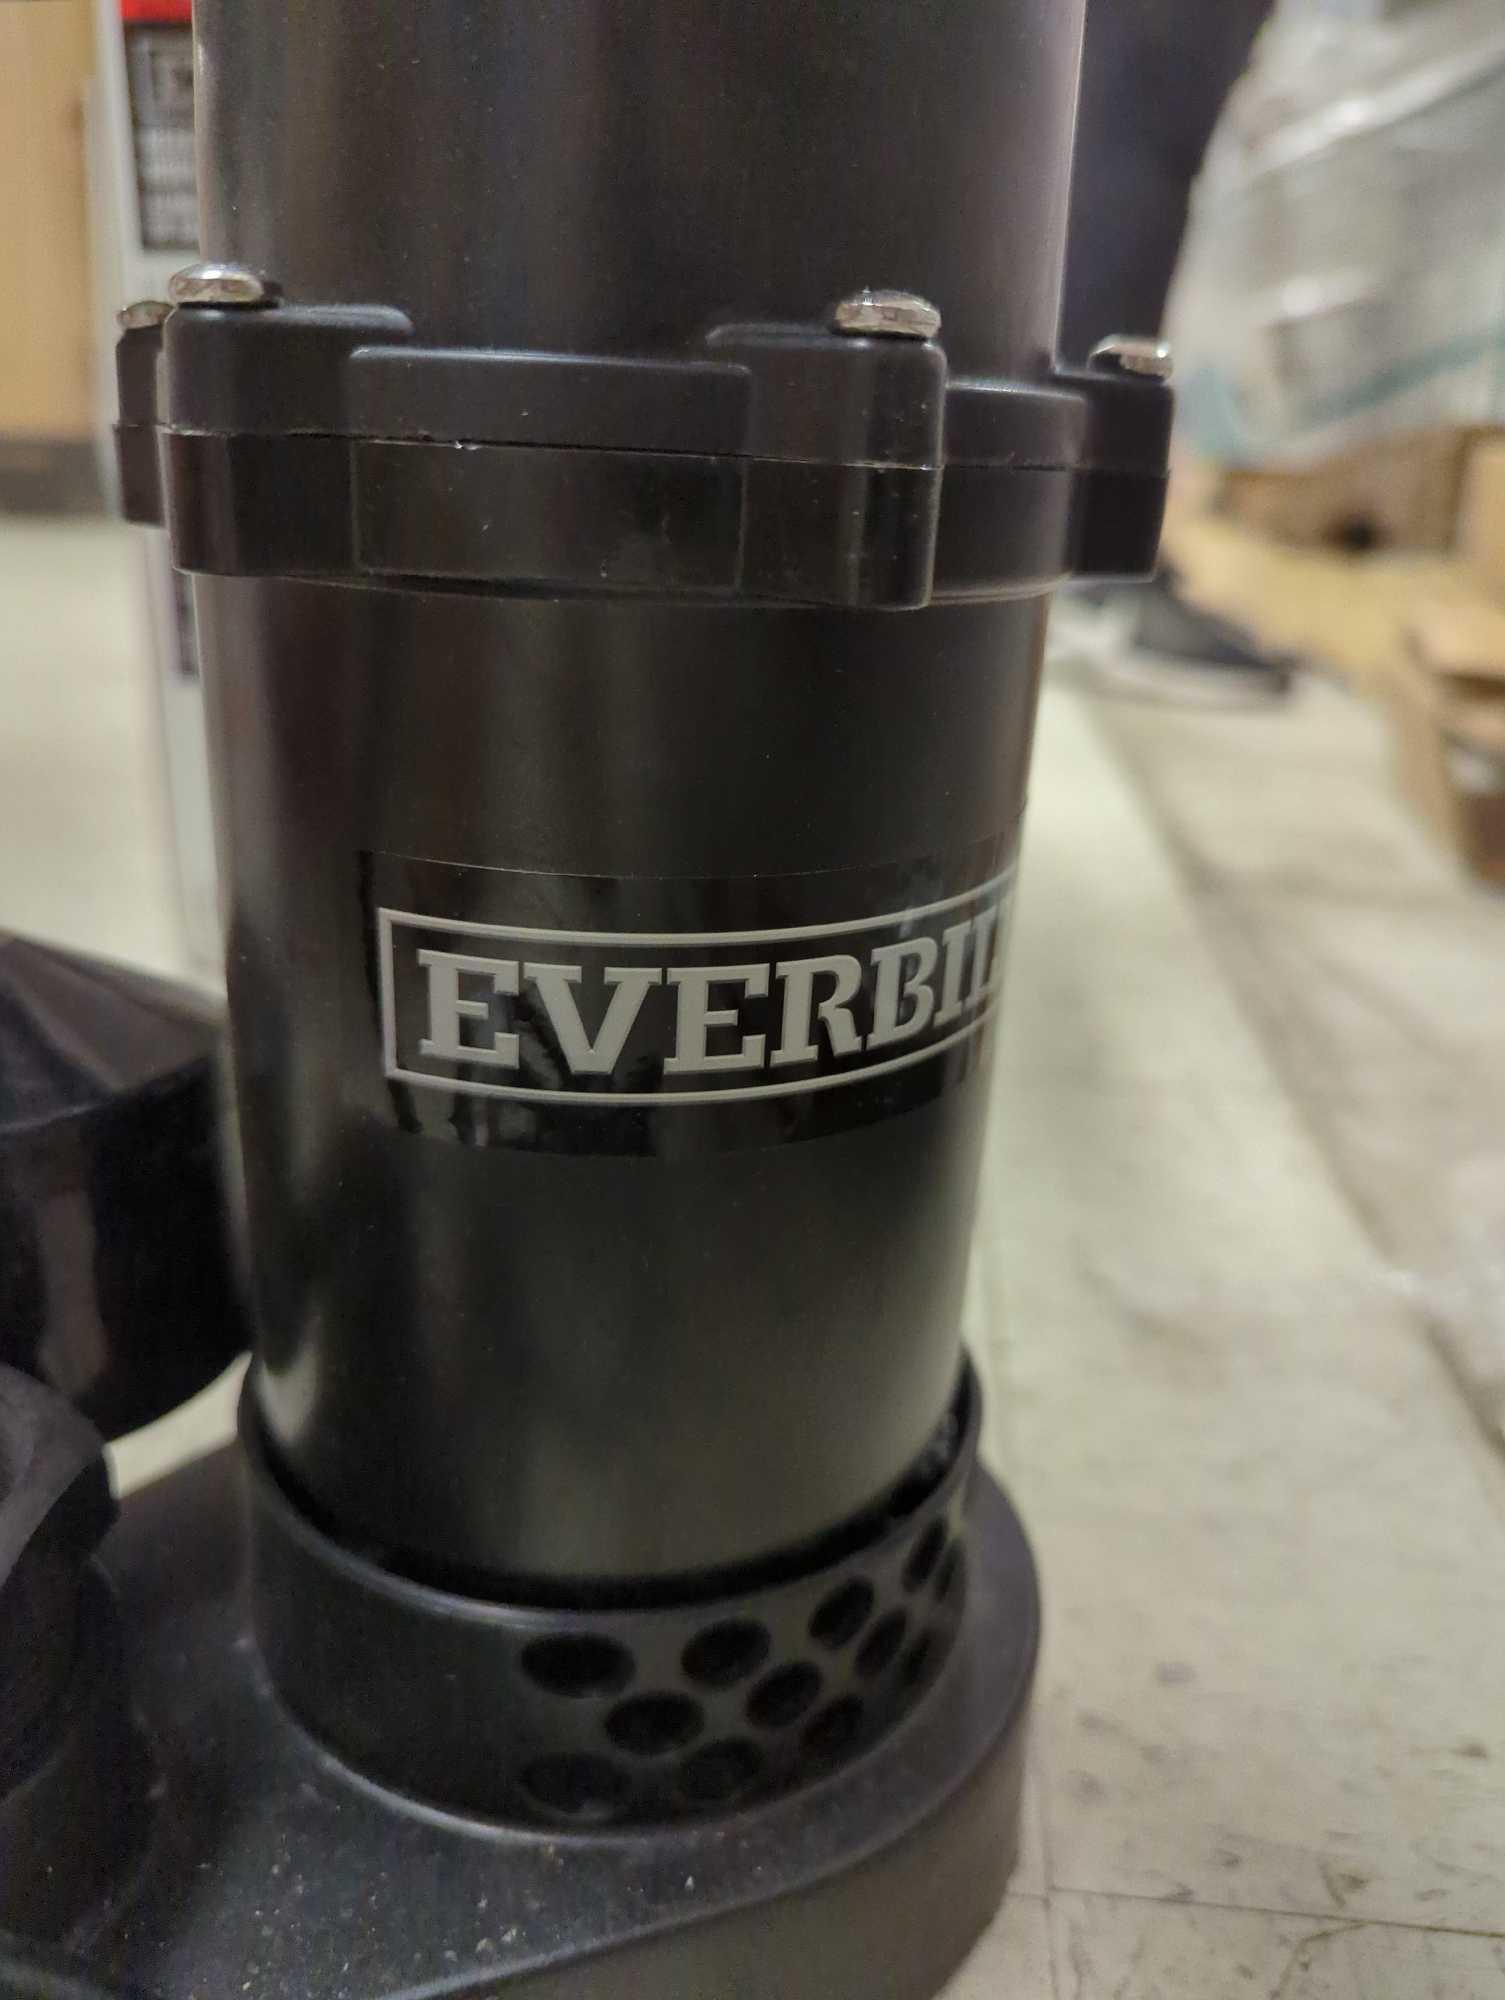 Everbilt 1/2 HP Aluminum Sump Pump Vertical Switch, Appears to be New in Open Box Retail Price Value